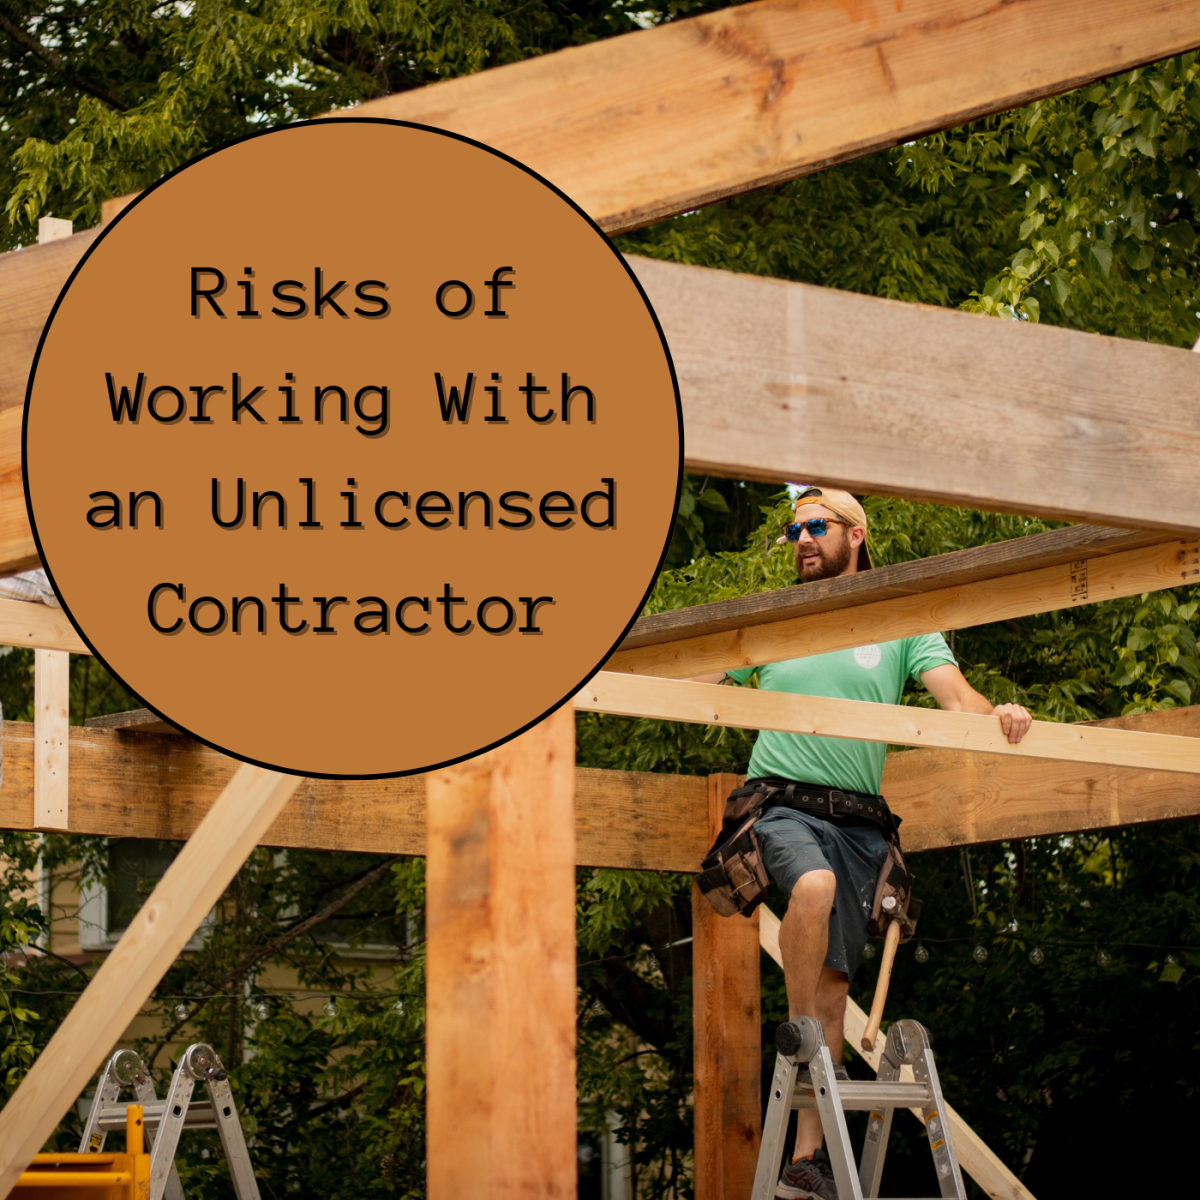 What Are the Risks of Working With an Unlicensed Contractor?